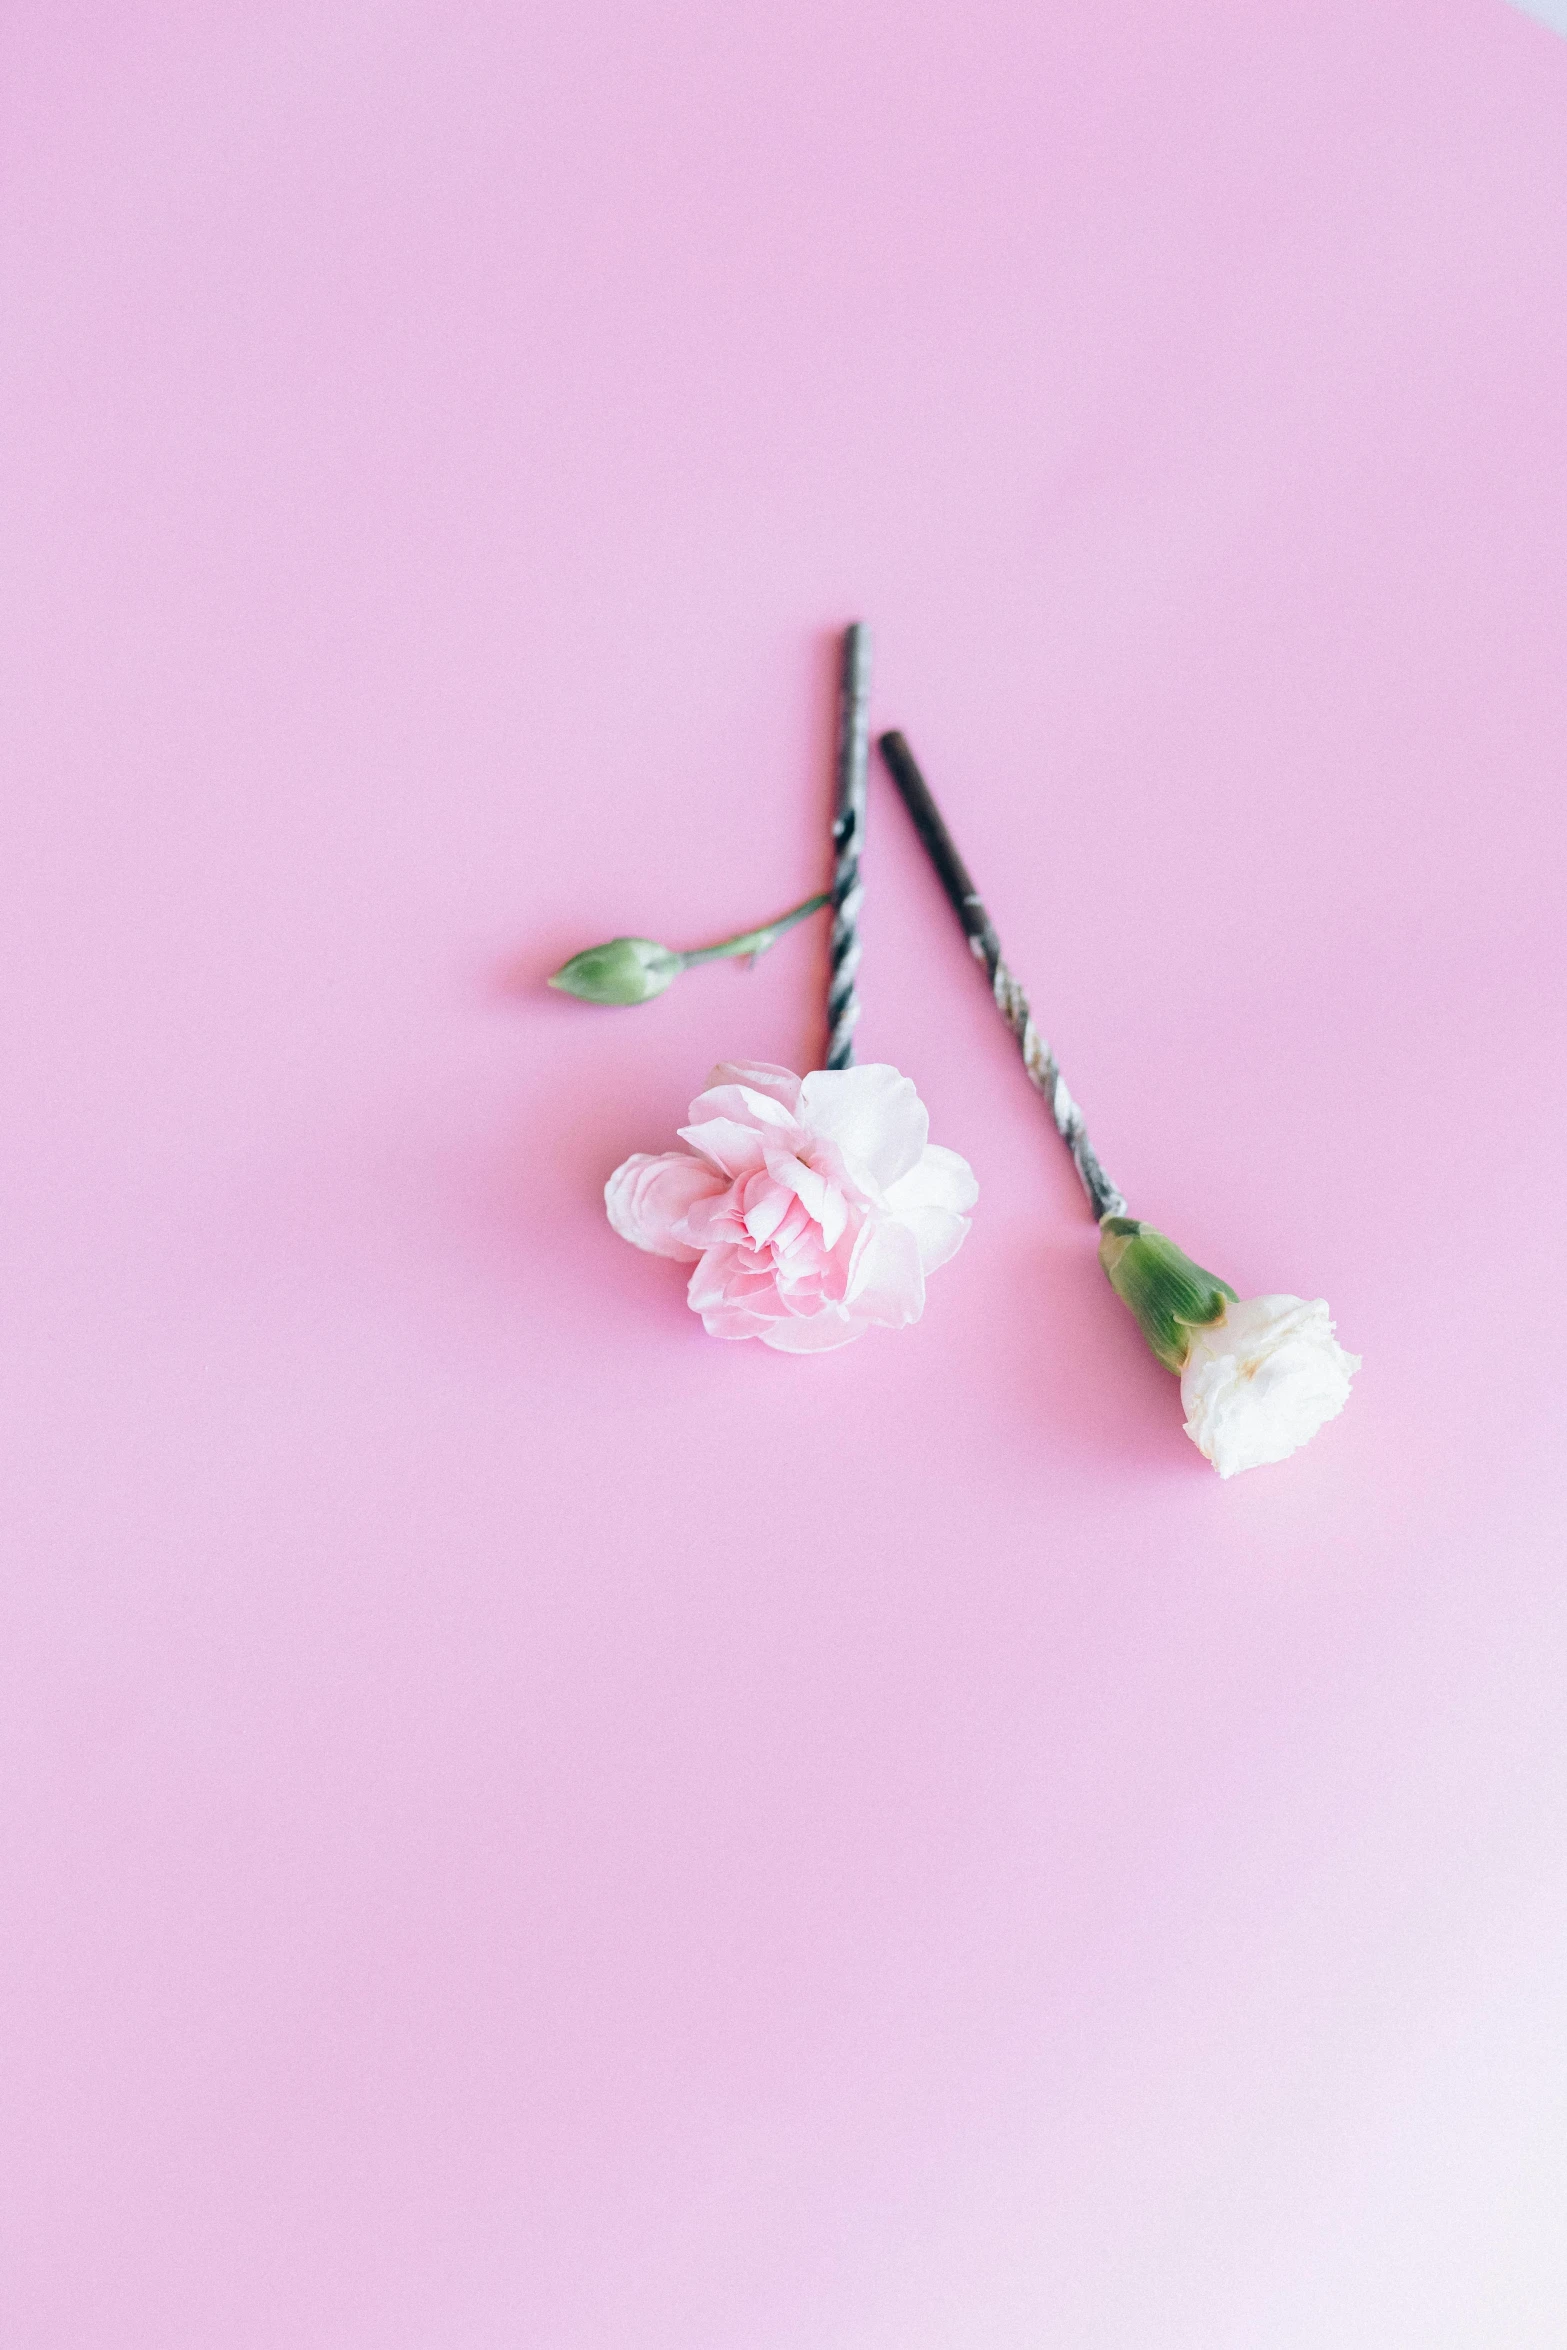 two pink carnations on a pink background, an album cover, inspired by Robert Mapplethorpe, trending on unsplash, romanticism, tiny sticks, flowers on hair, stick poke, hyperminimalist